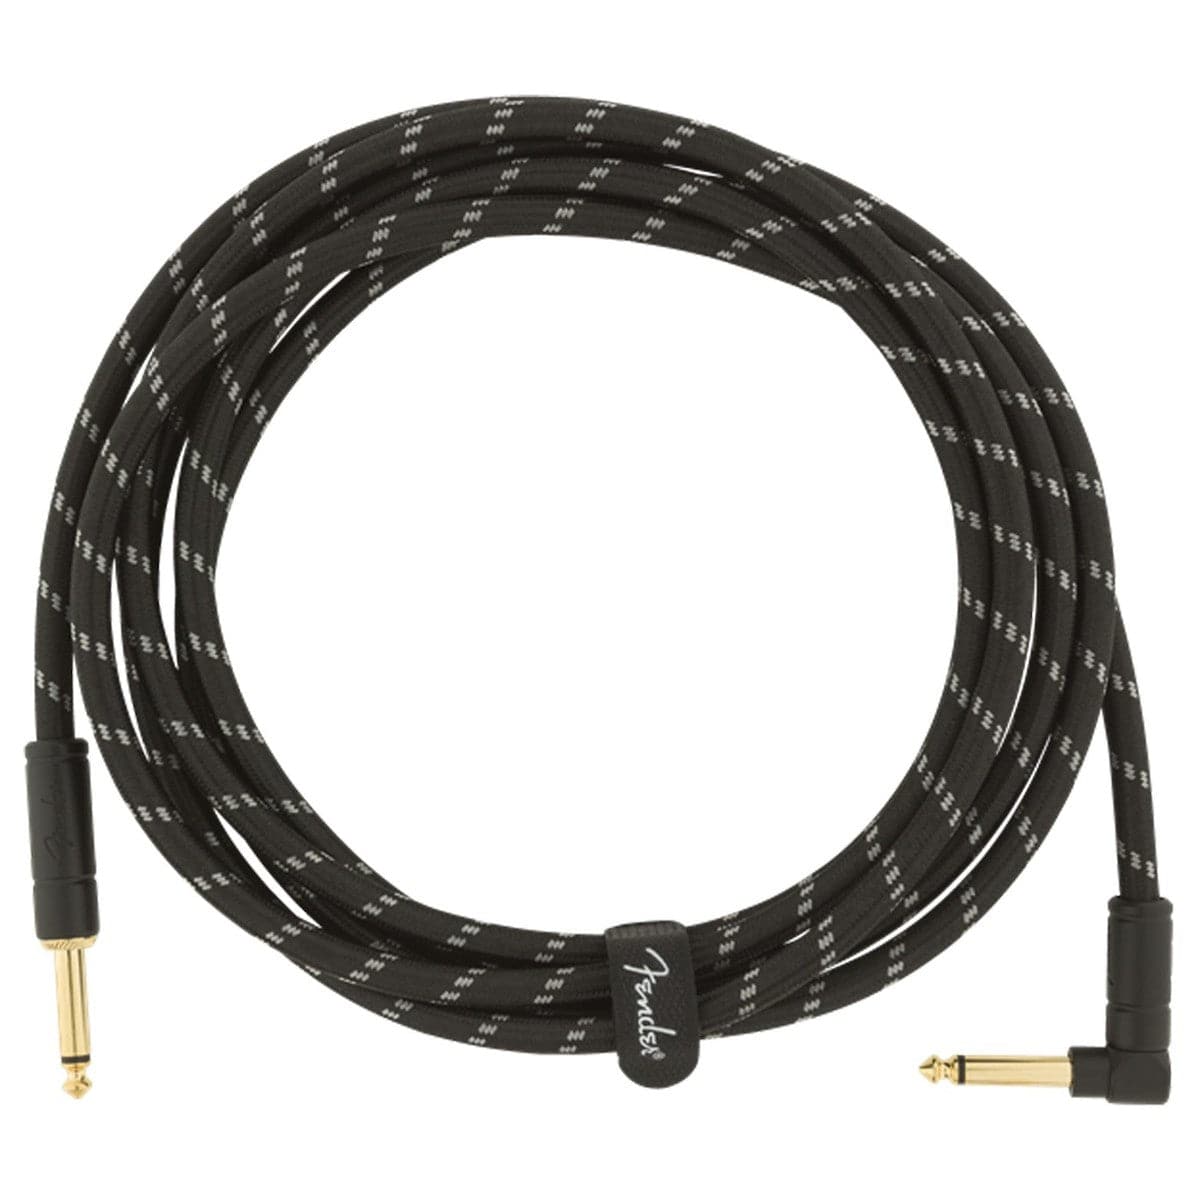 Fender Deluxe Series Black Tweed Guitar Cable - 10foot (3 meters) - Right Angle